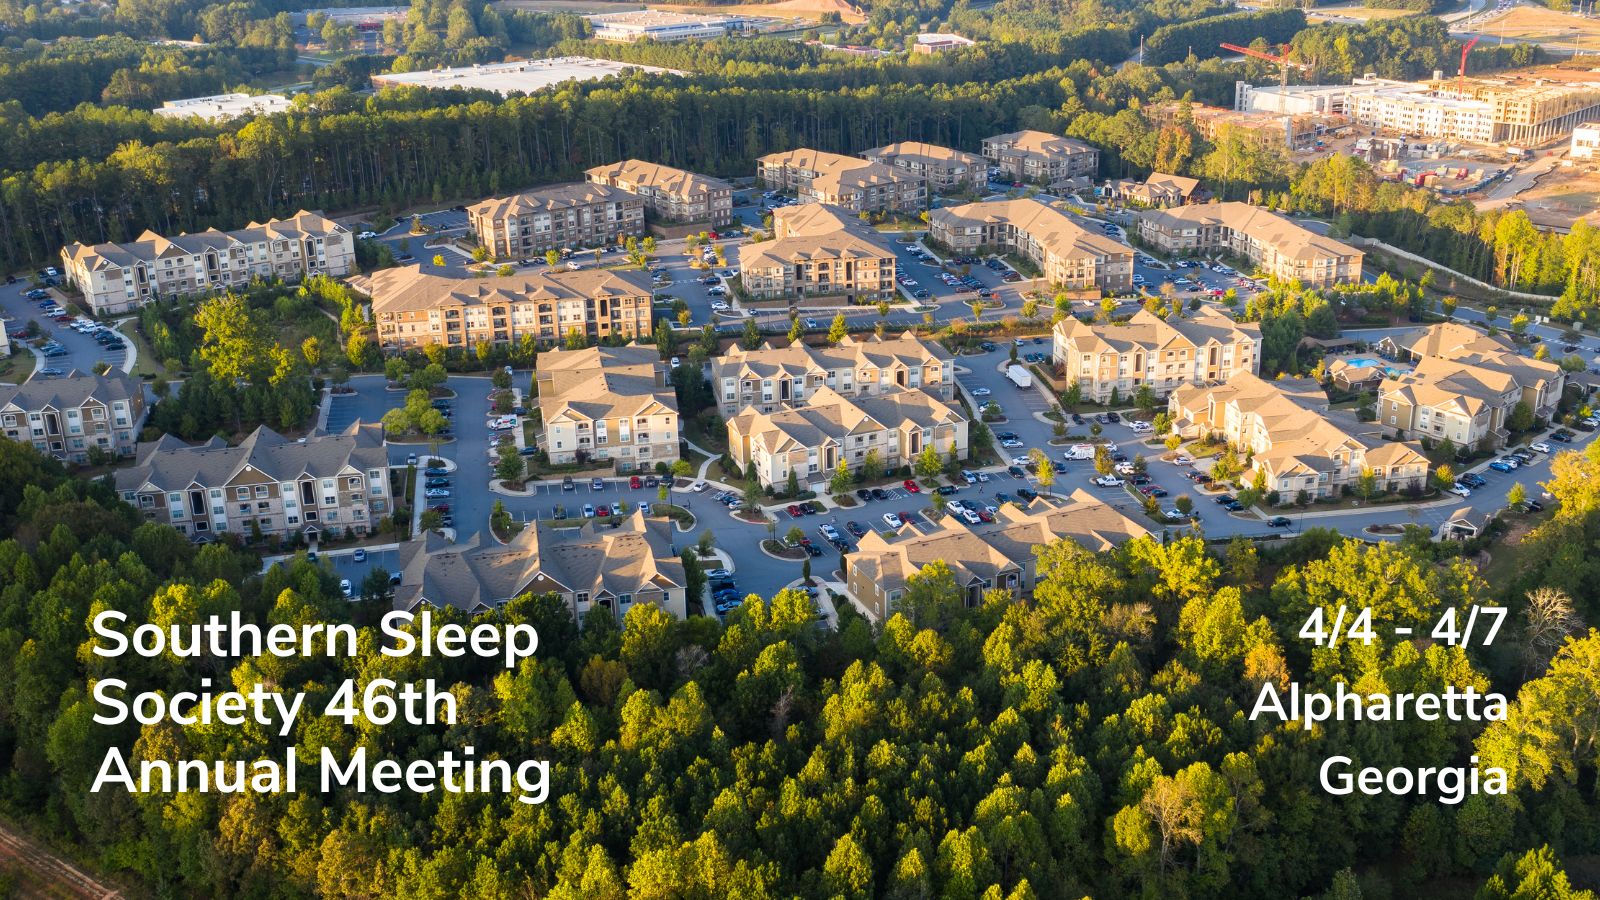 Join EnsoData at the 46th Annual Southern Sleep Society Meeting